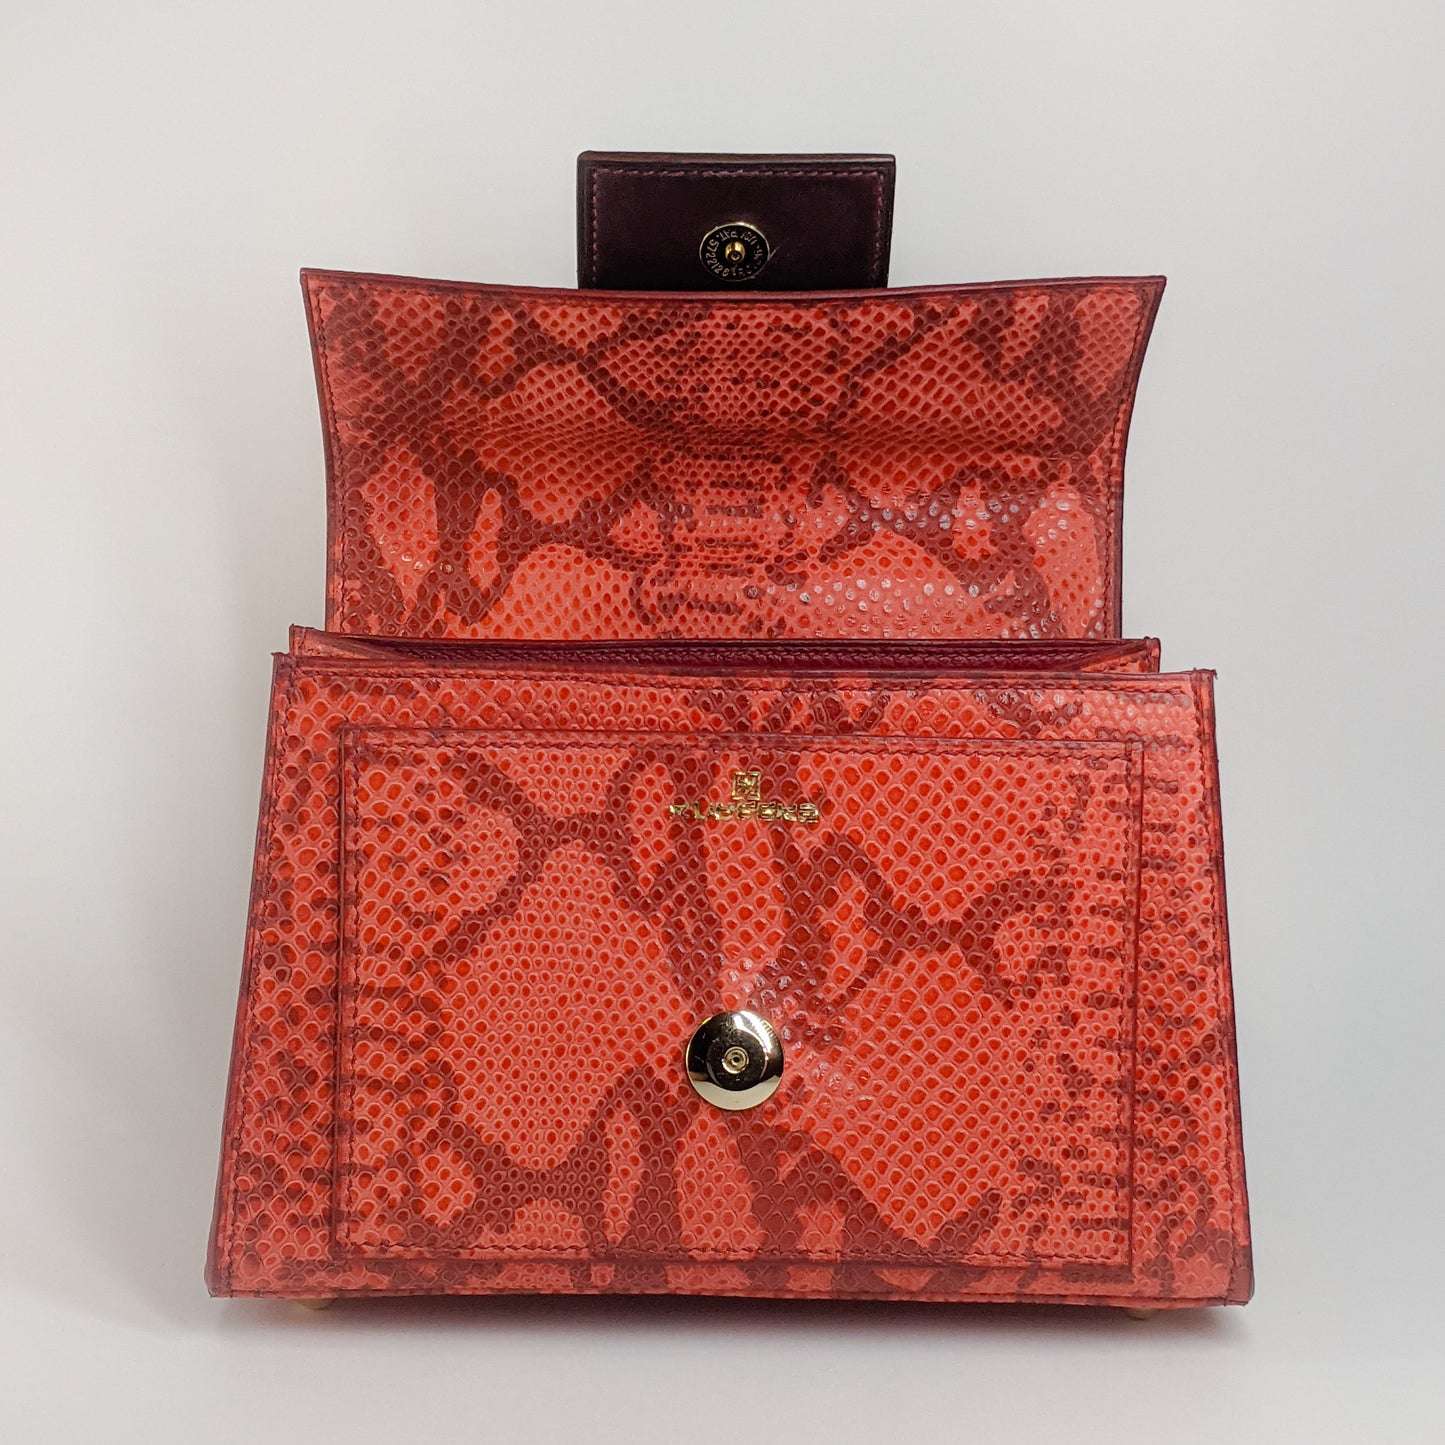 Berry Mini Handbag with Shoulder Strap Red Embossed Python by Kubeeka